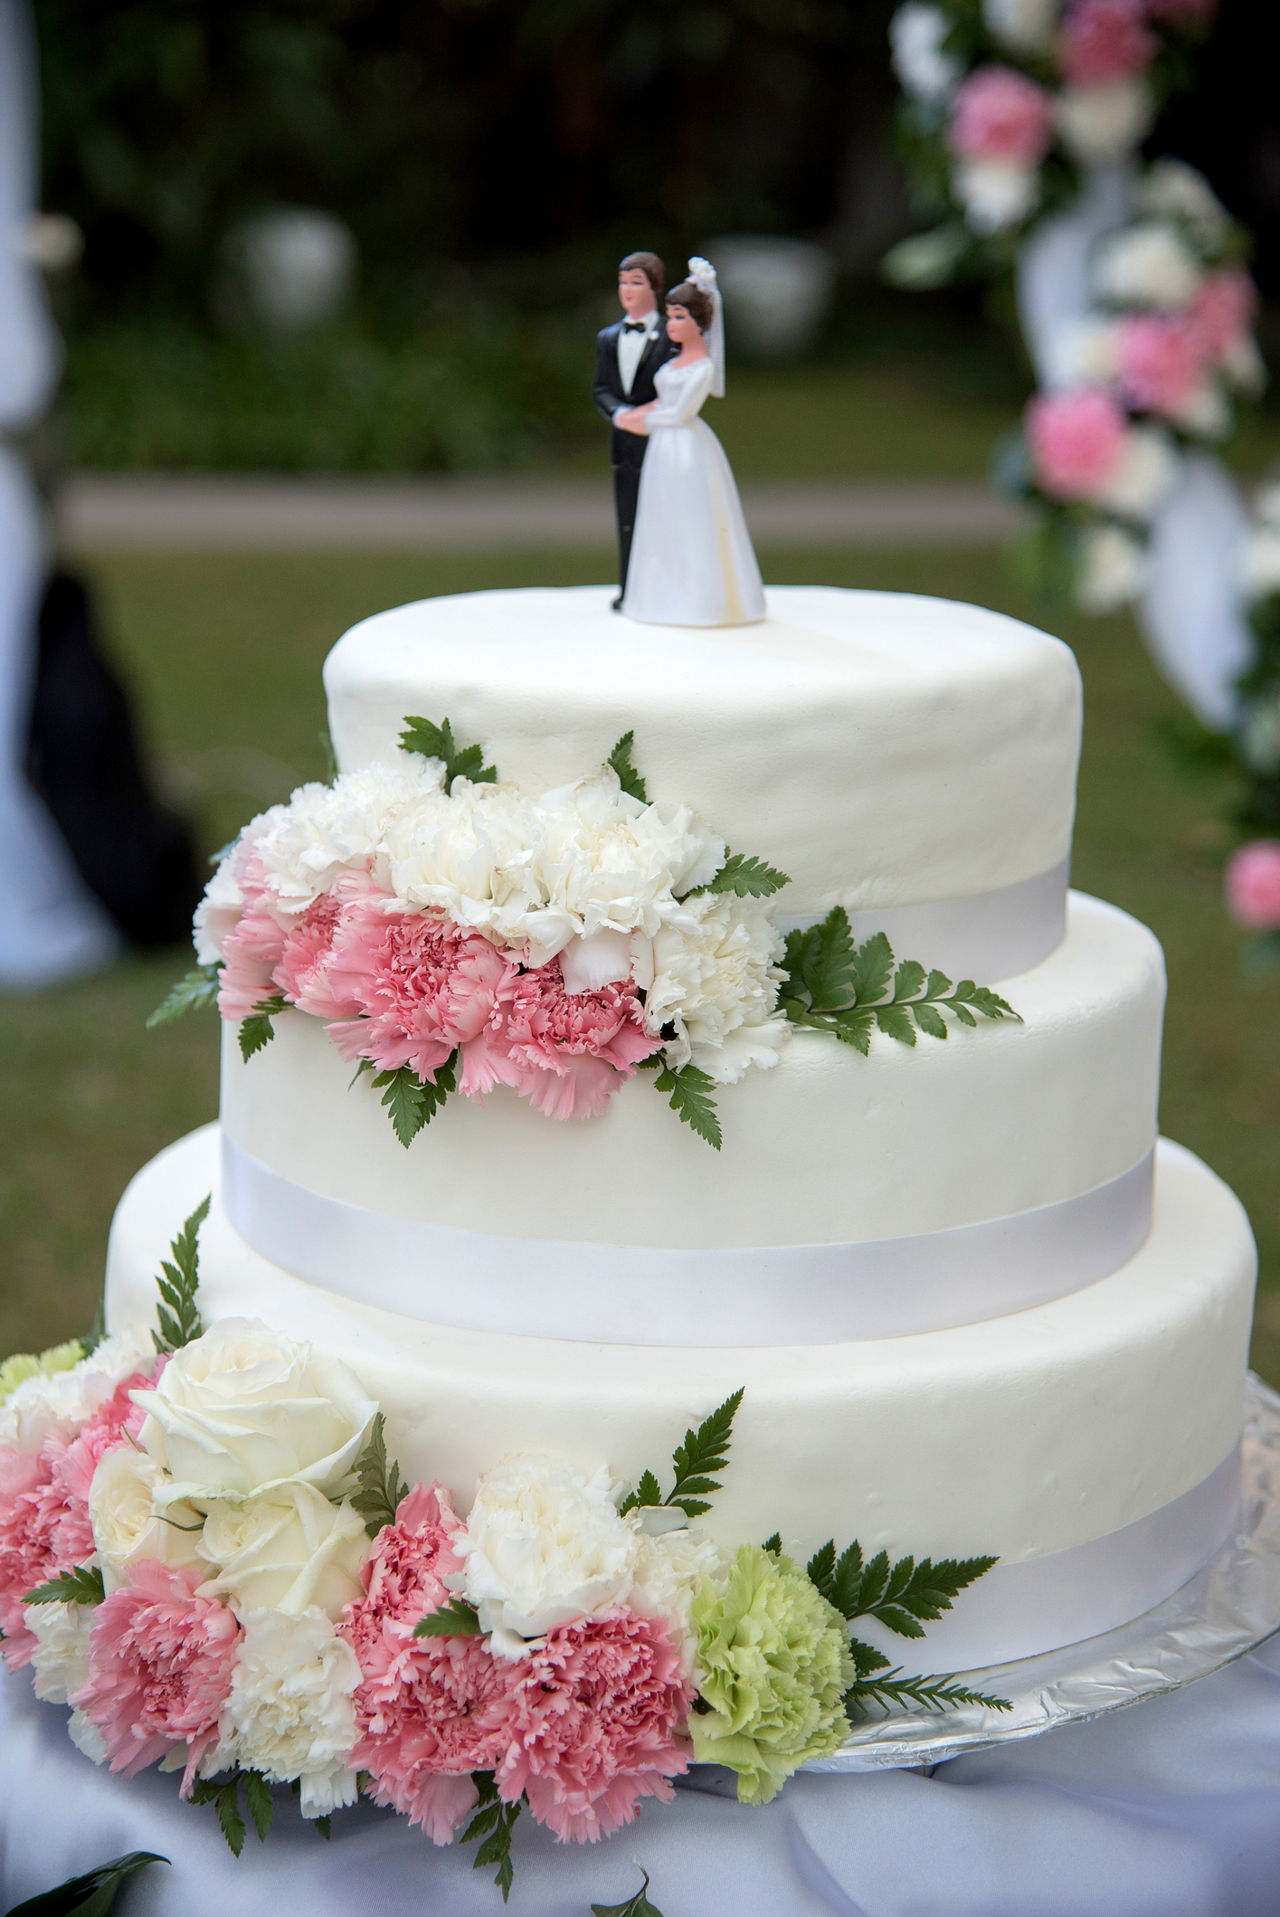 Bake Your Own Wedding Cake From Scratch With These Great Recipes Wedessence 